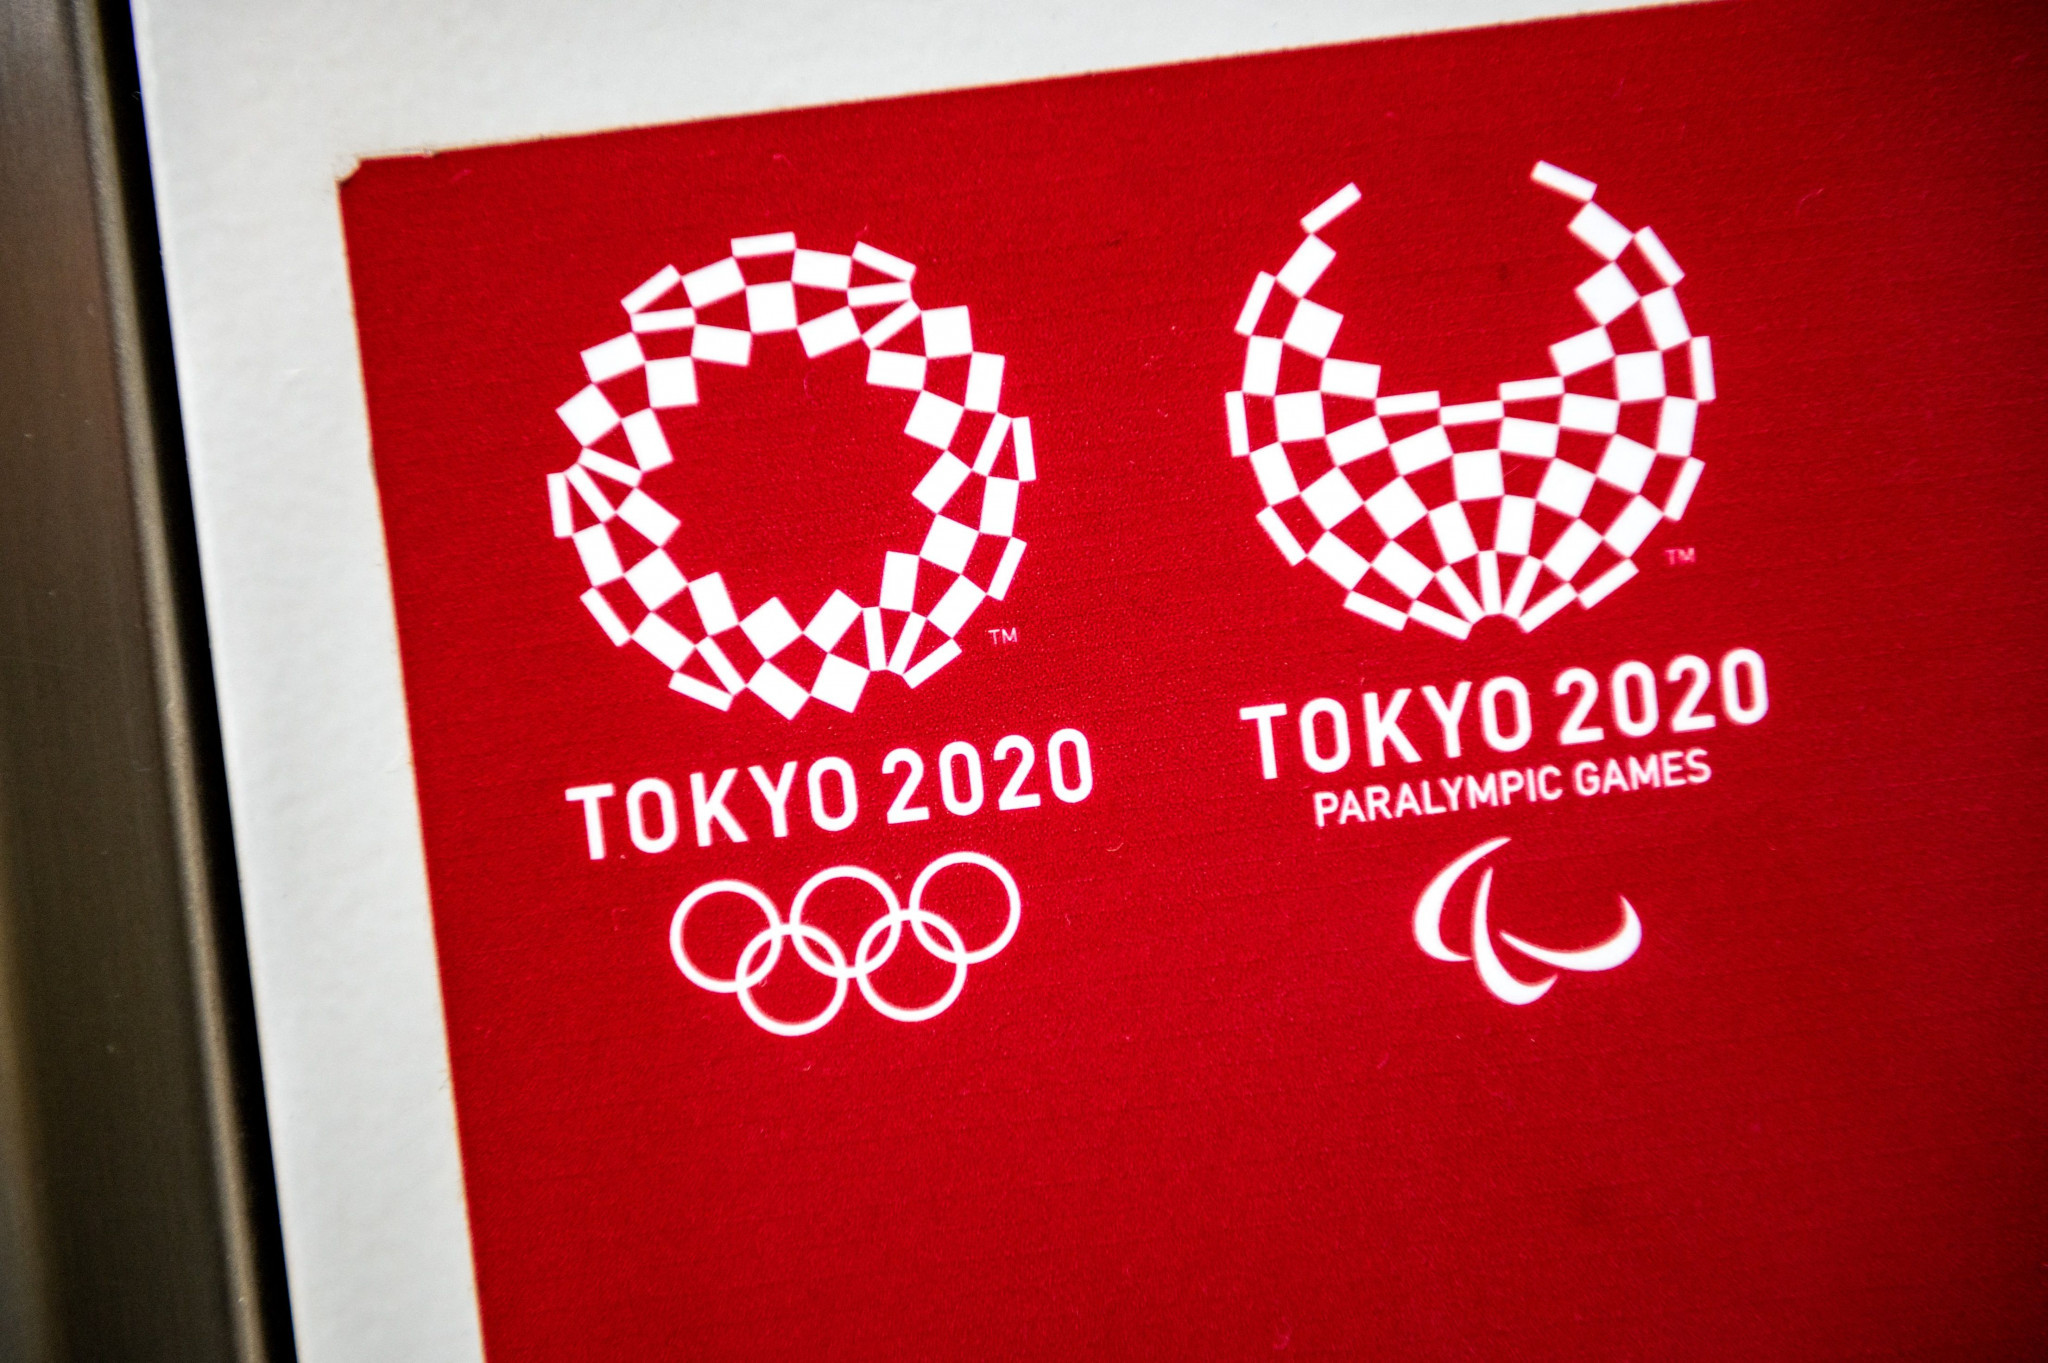 Tokyo 2020 are reportedly aiming to cut the number of officials attending the Games by a further 25,000 ©Getty Images